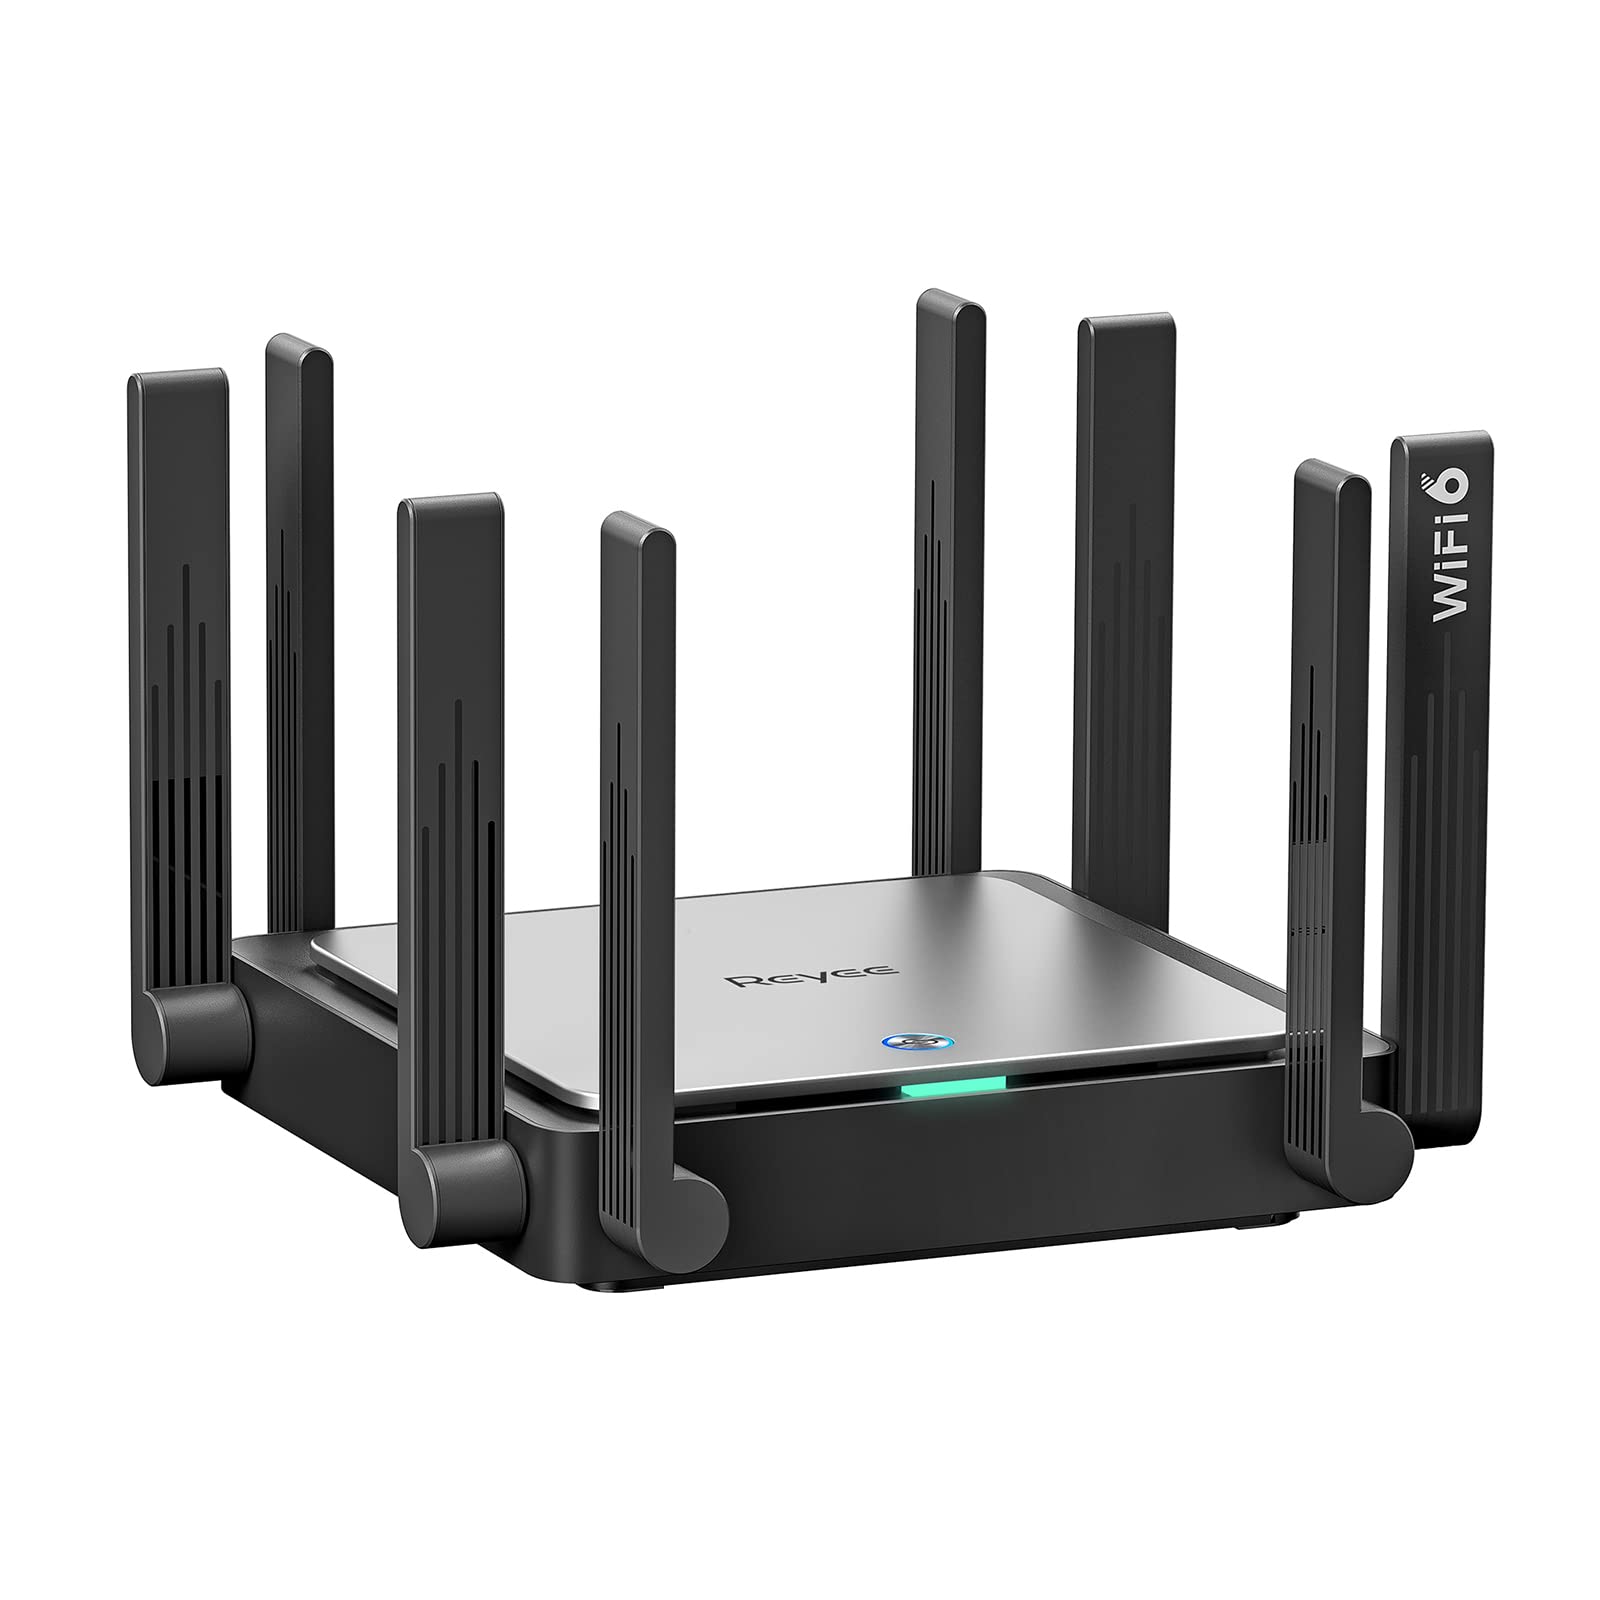 Router compatibility page